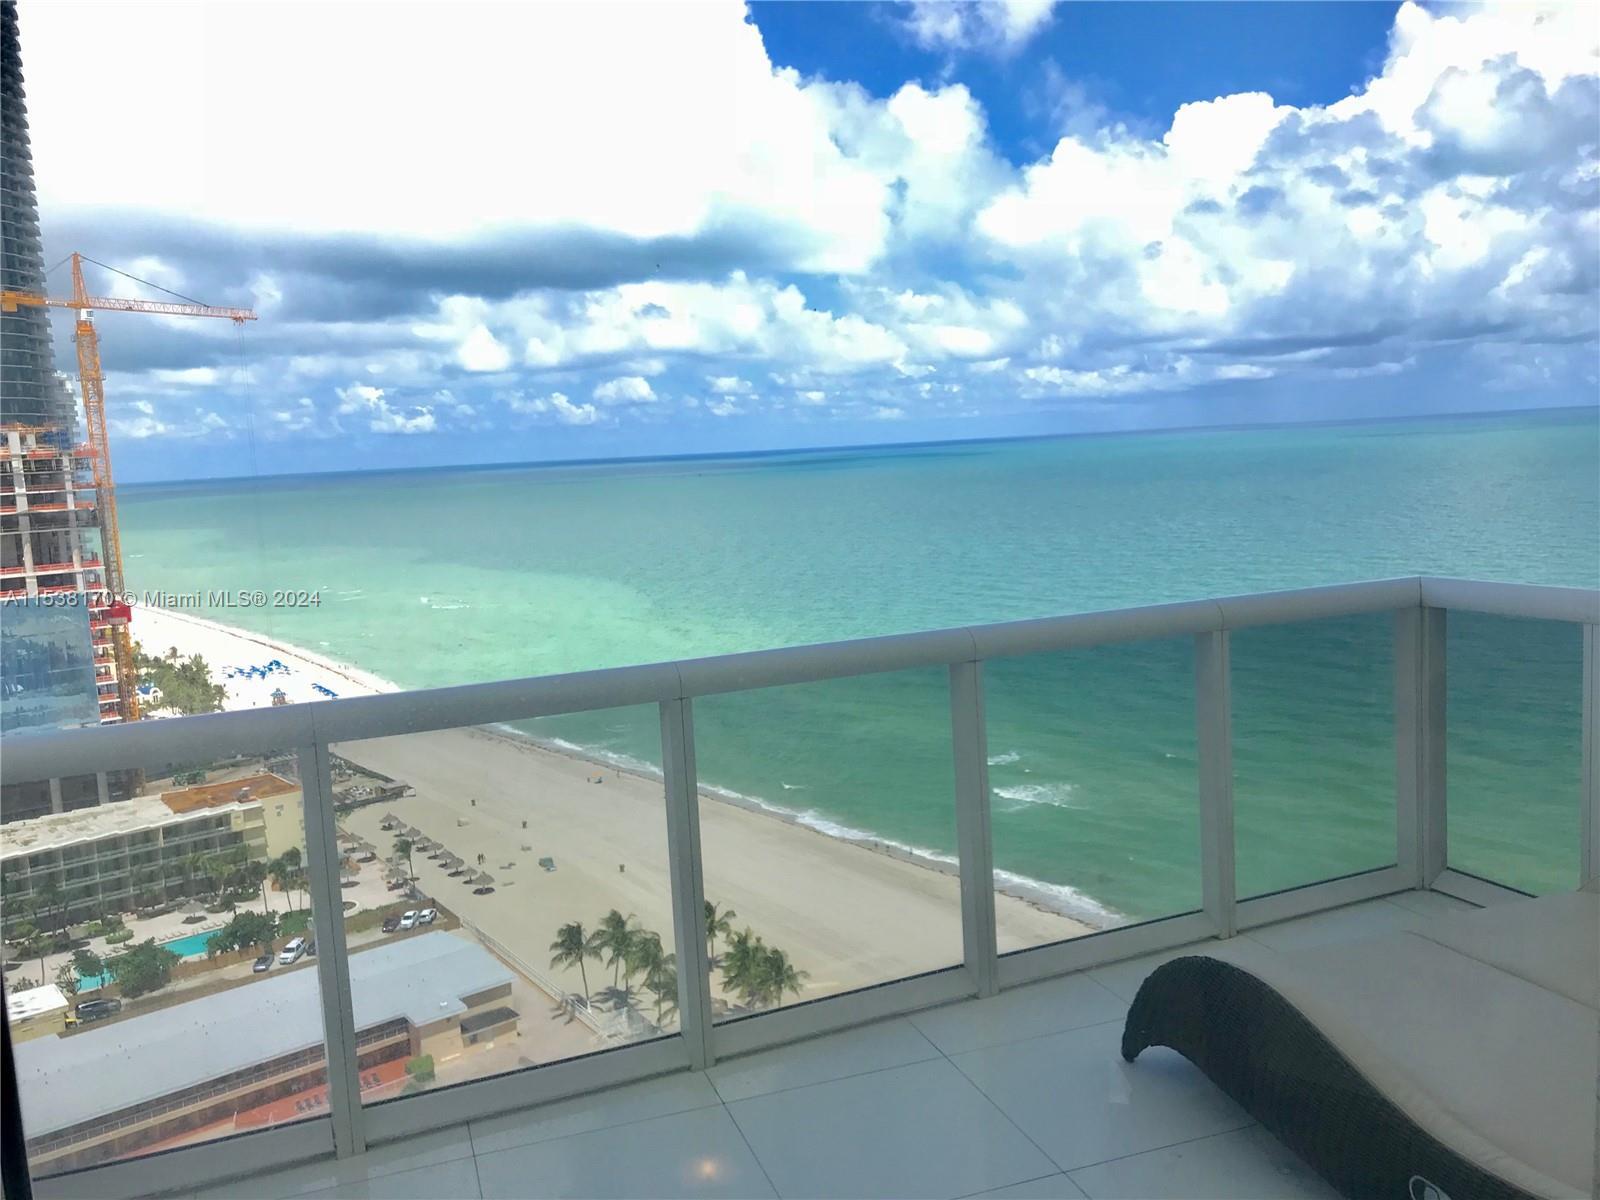 1 Bed 1 1/2 Bath with direct ocean and intercoastal views.  Exclusive oceanfront property with pools